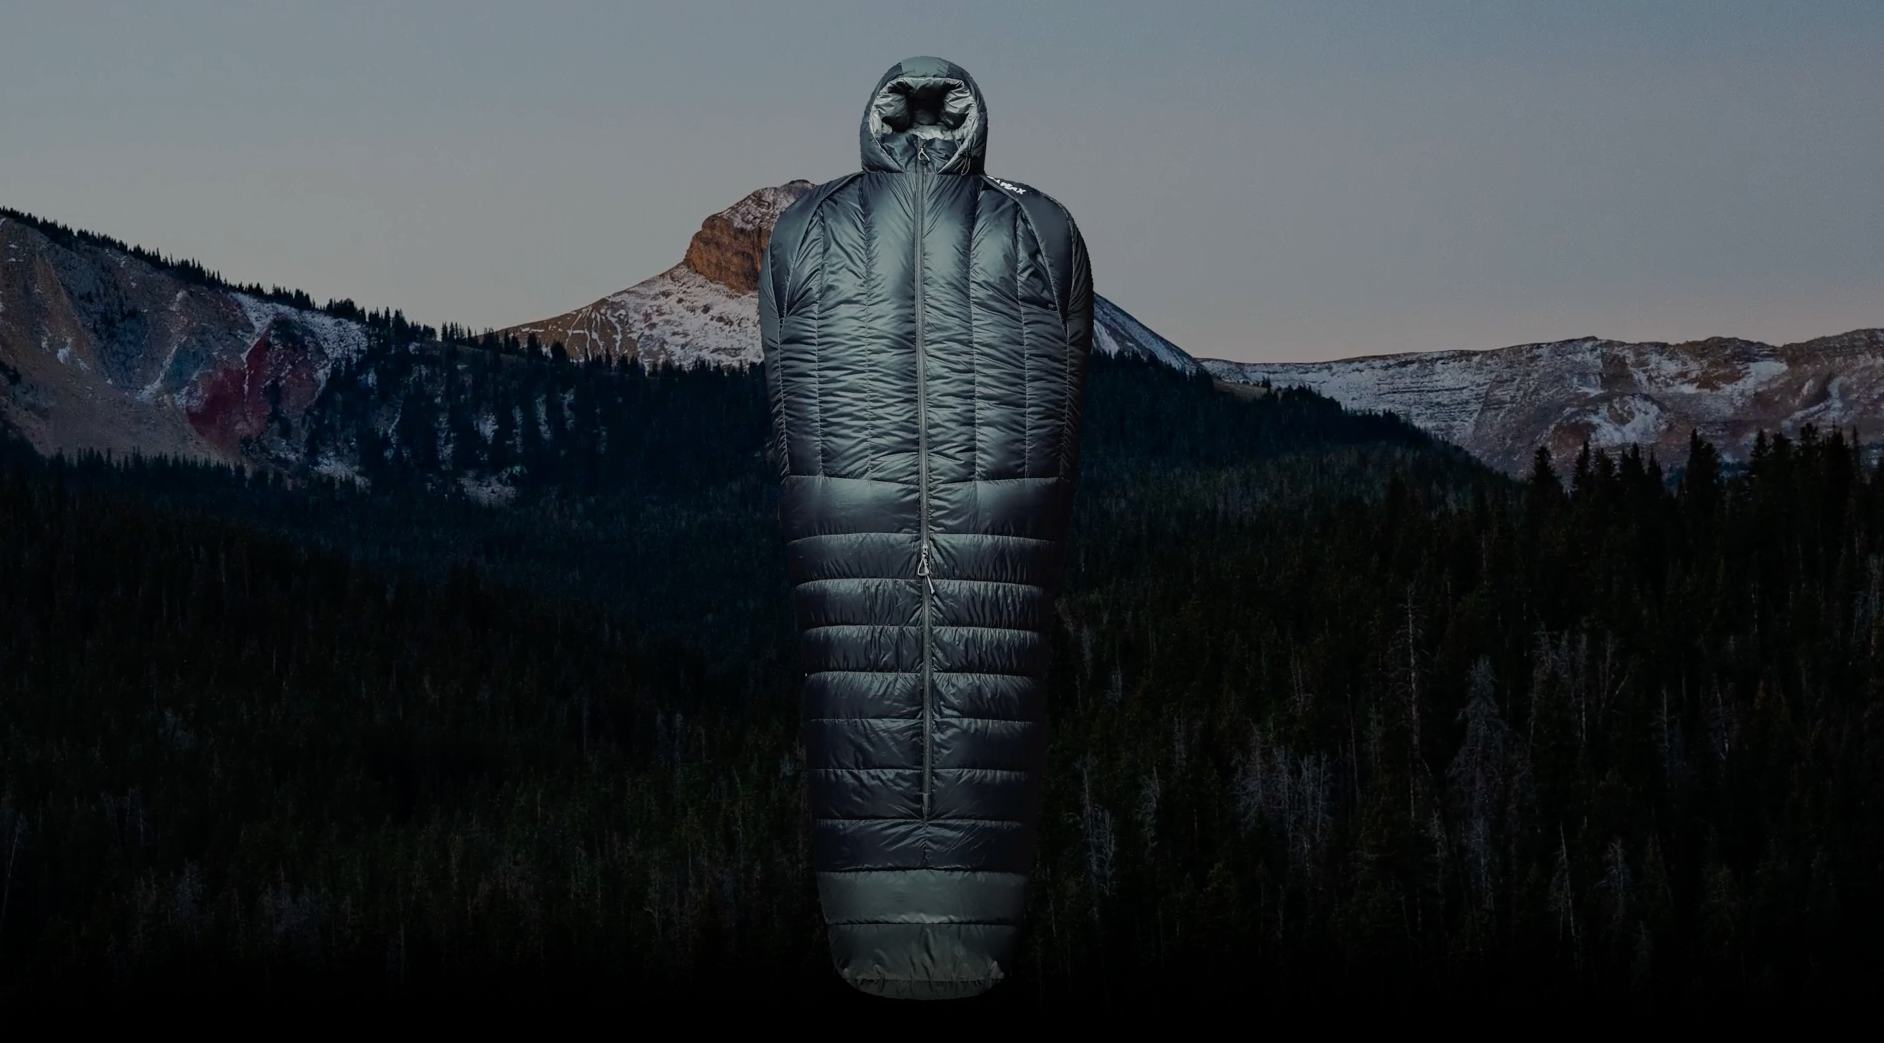 Design and Development of the Solace 15 Sleeping Bag